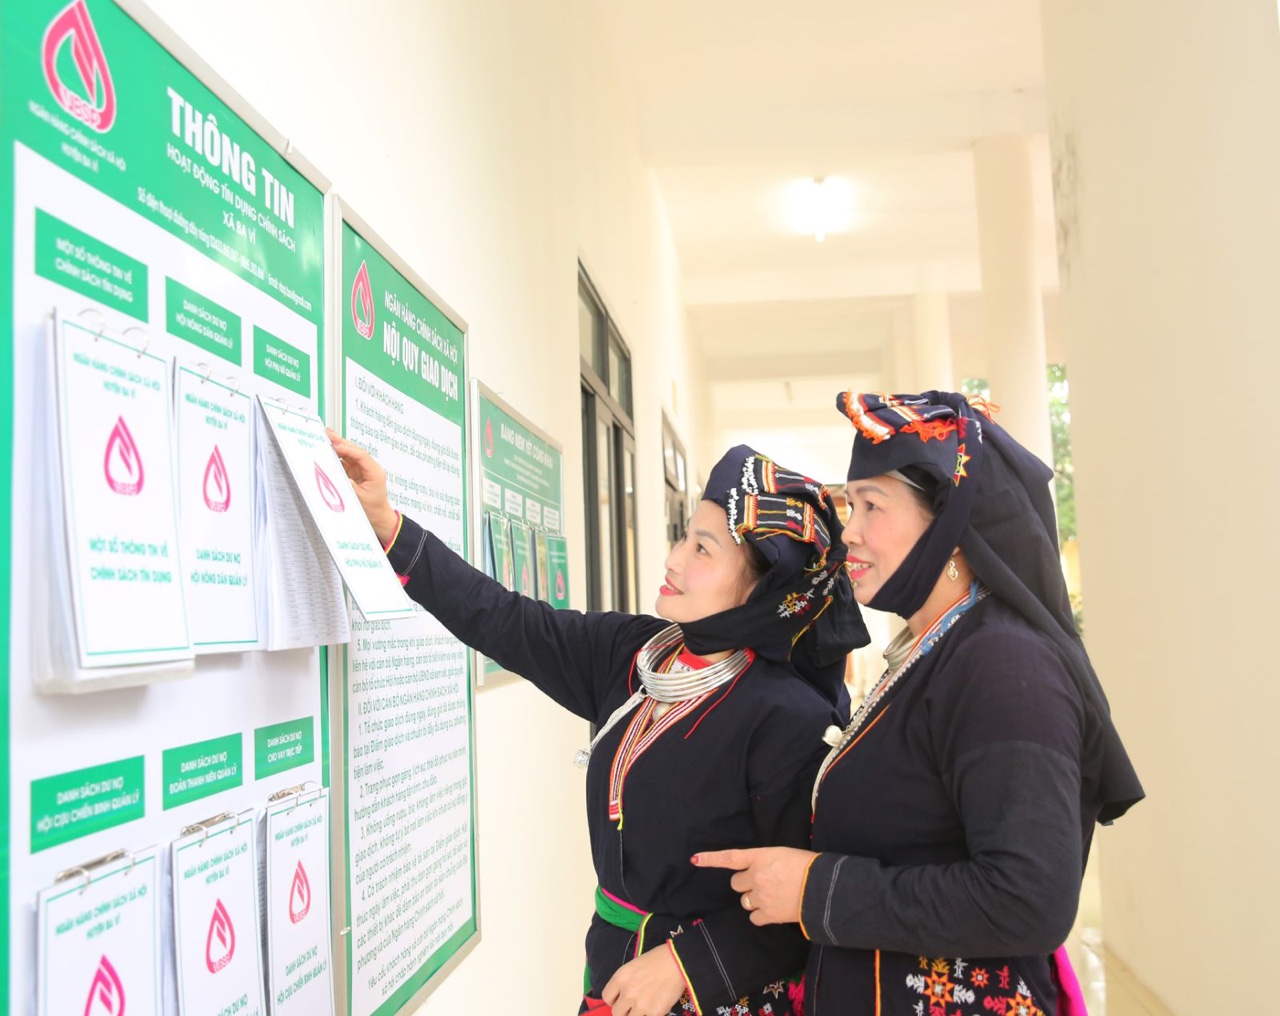 Policies on supporting tourism development in Lao Cai province in the period of 2021-2025